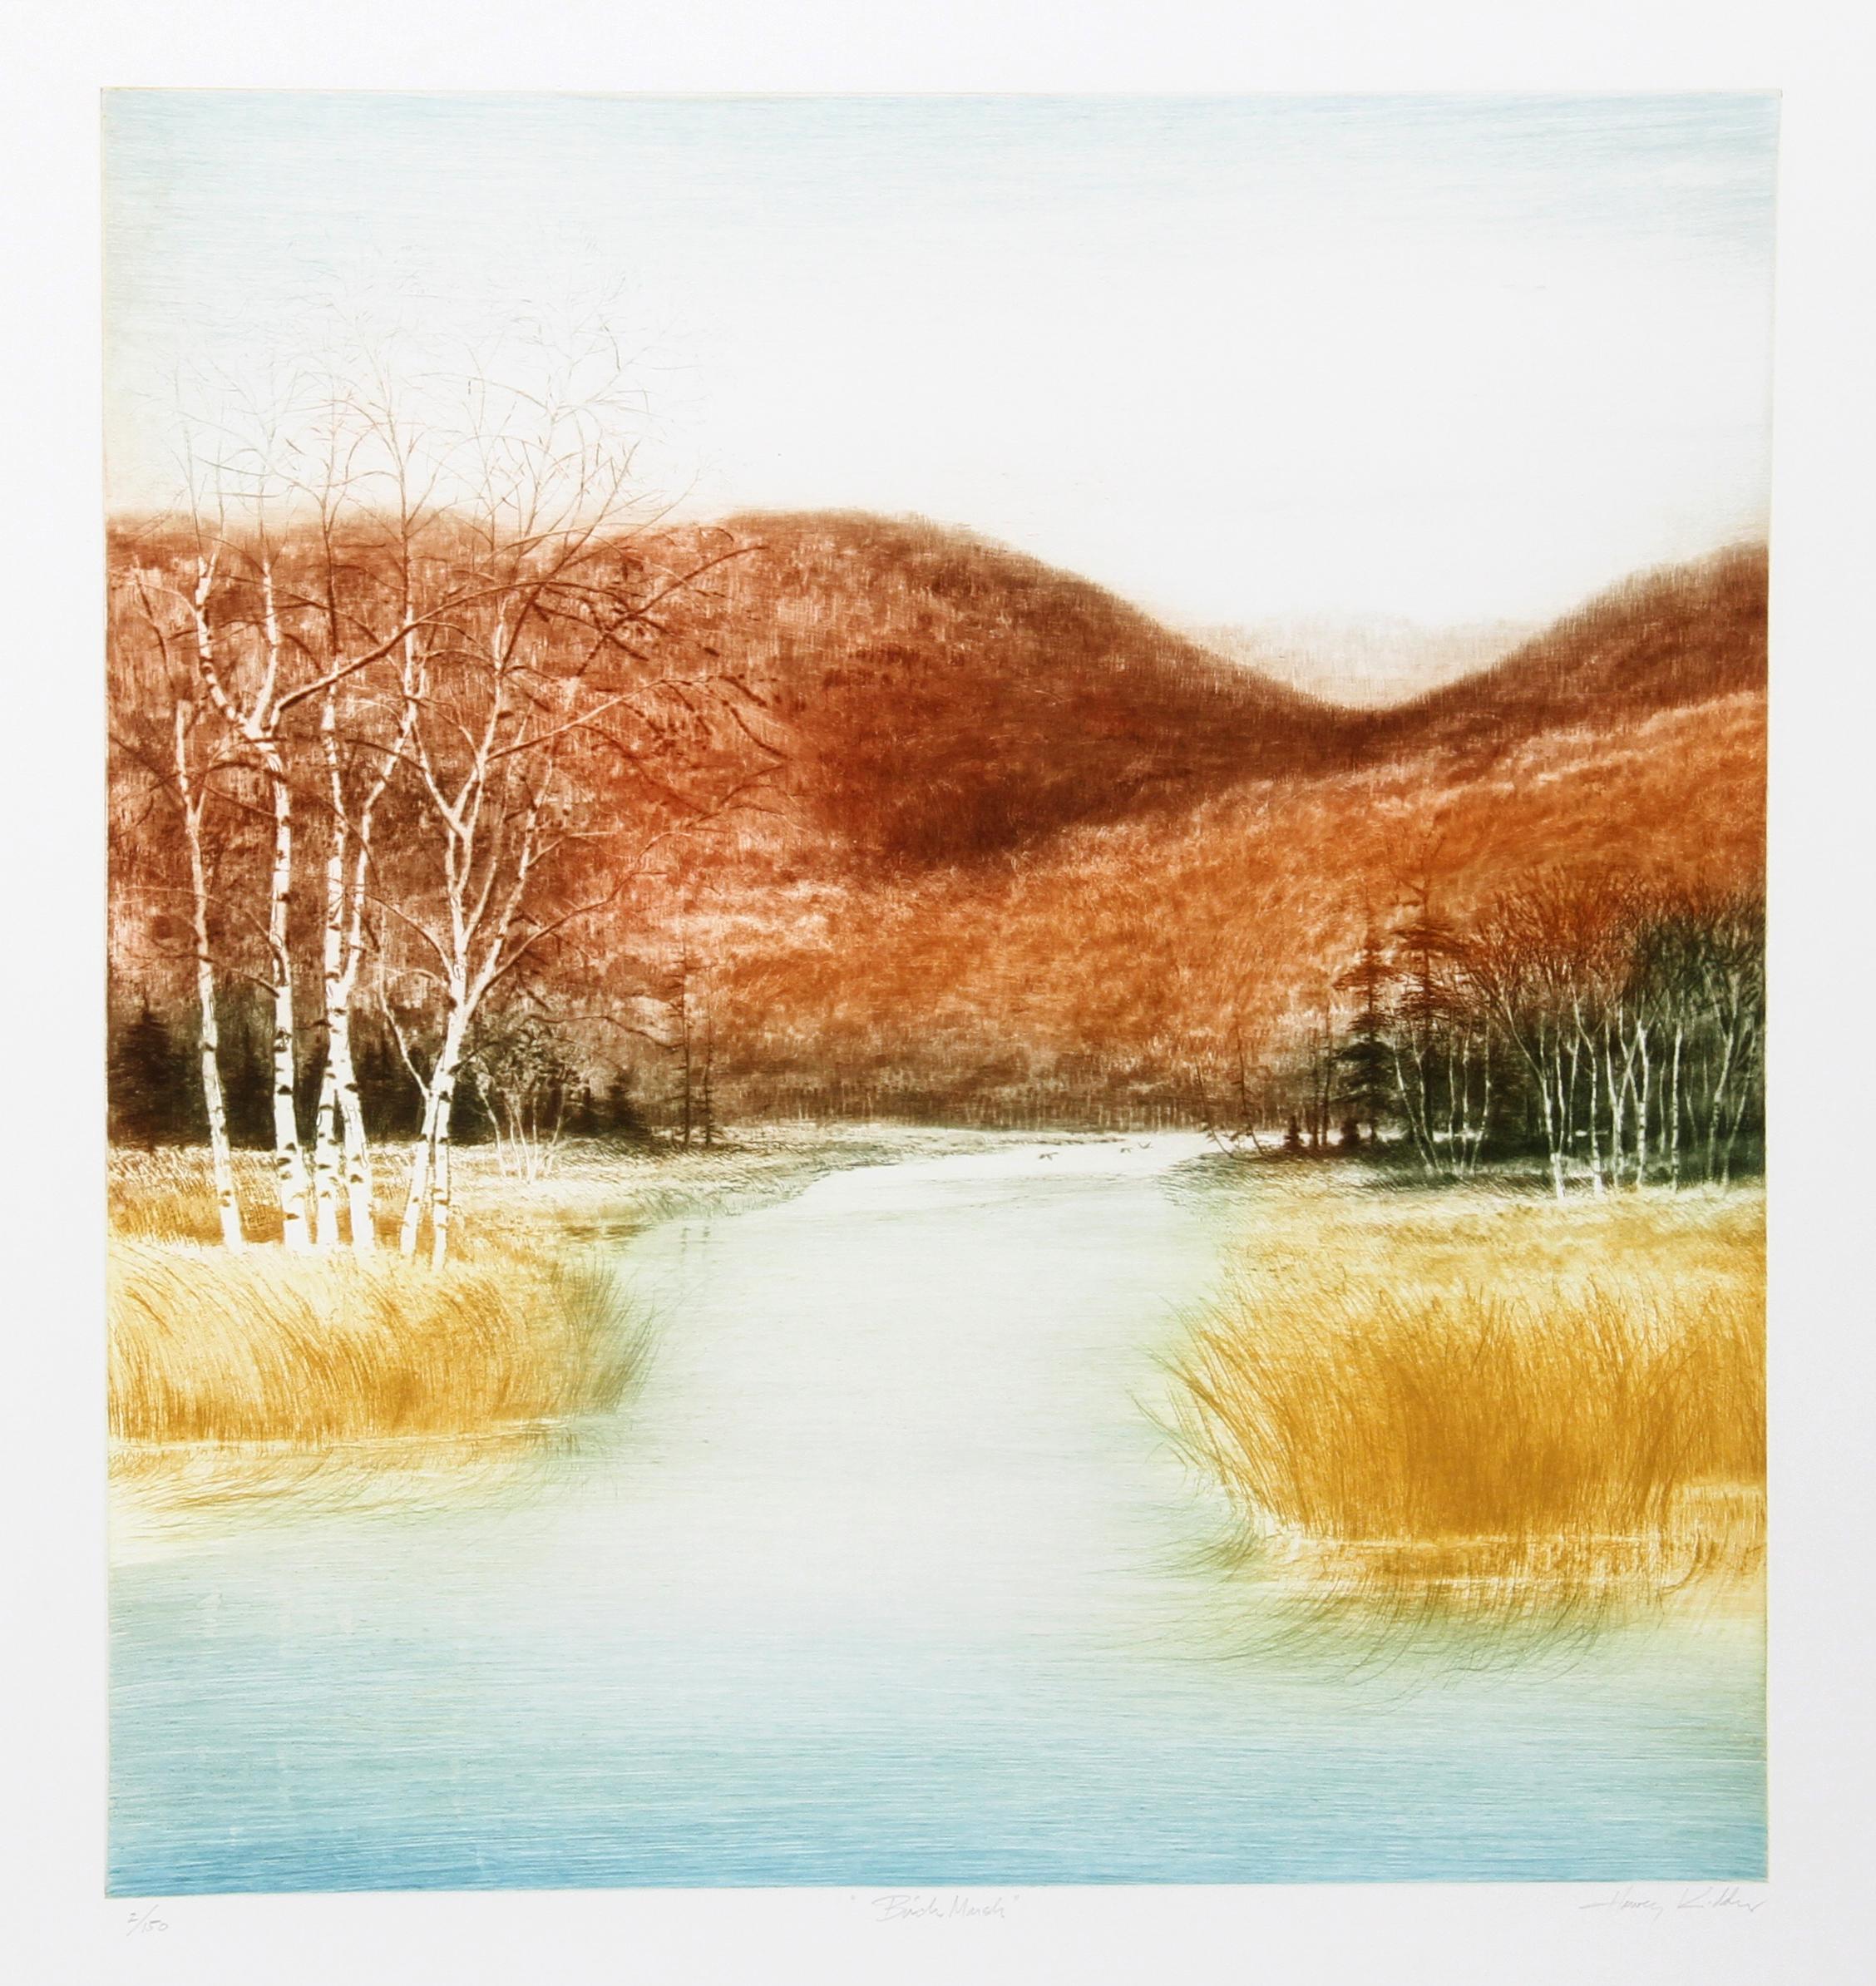 Birch Marsh
Harvey Kidder, American (1918–2001)
Date: circa 1985
Aquatint Etching, Signed and numbered in Pencil
Edition of 150
Size: 33 in. x 29.5 in. (83.82 cm x 74.93 cm)